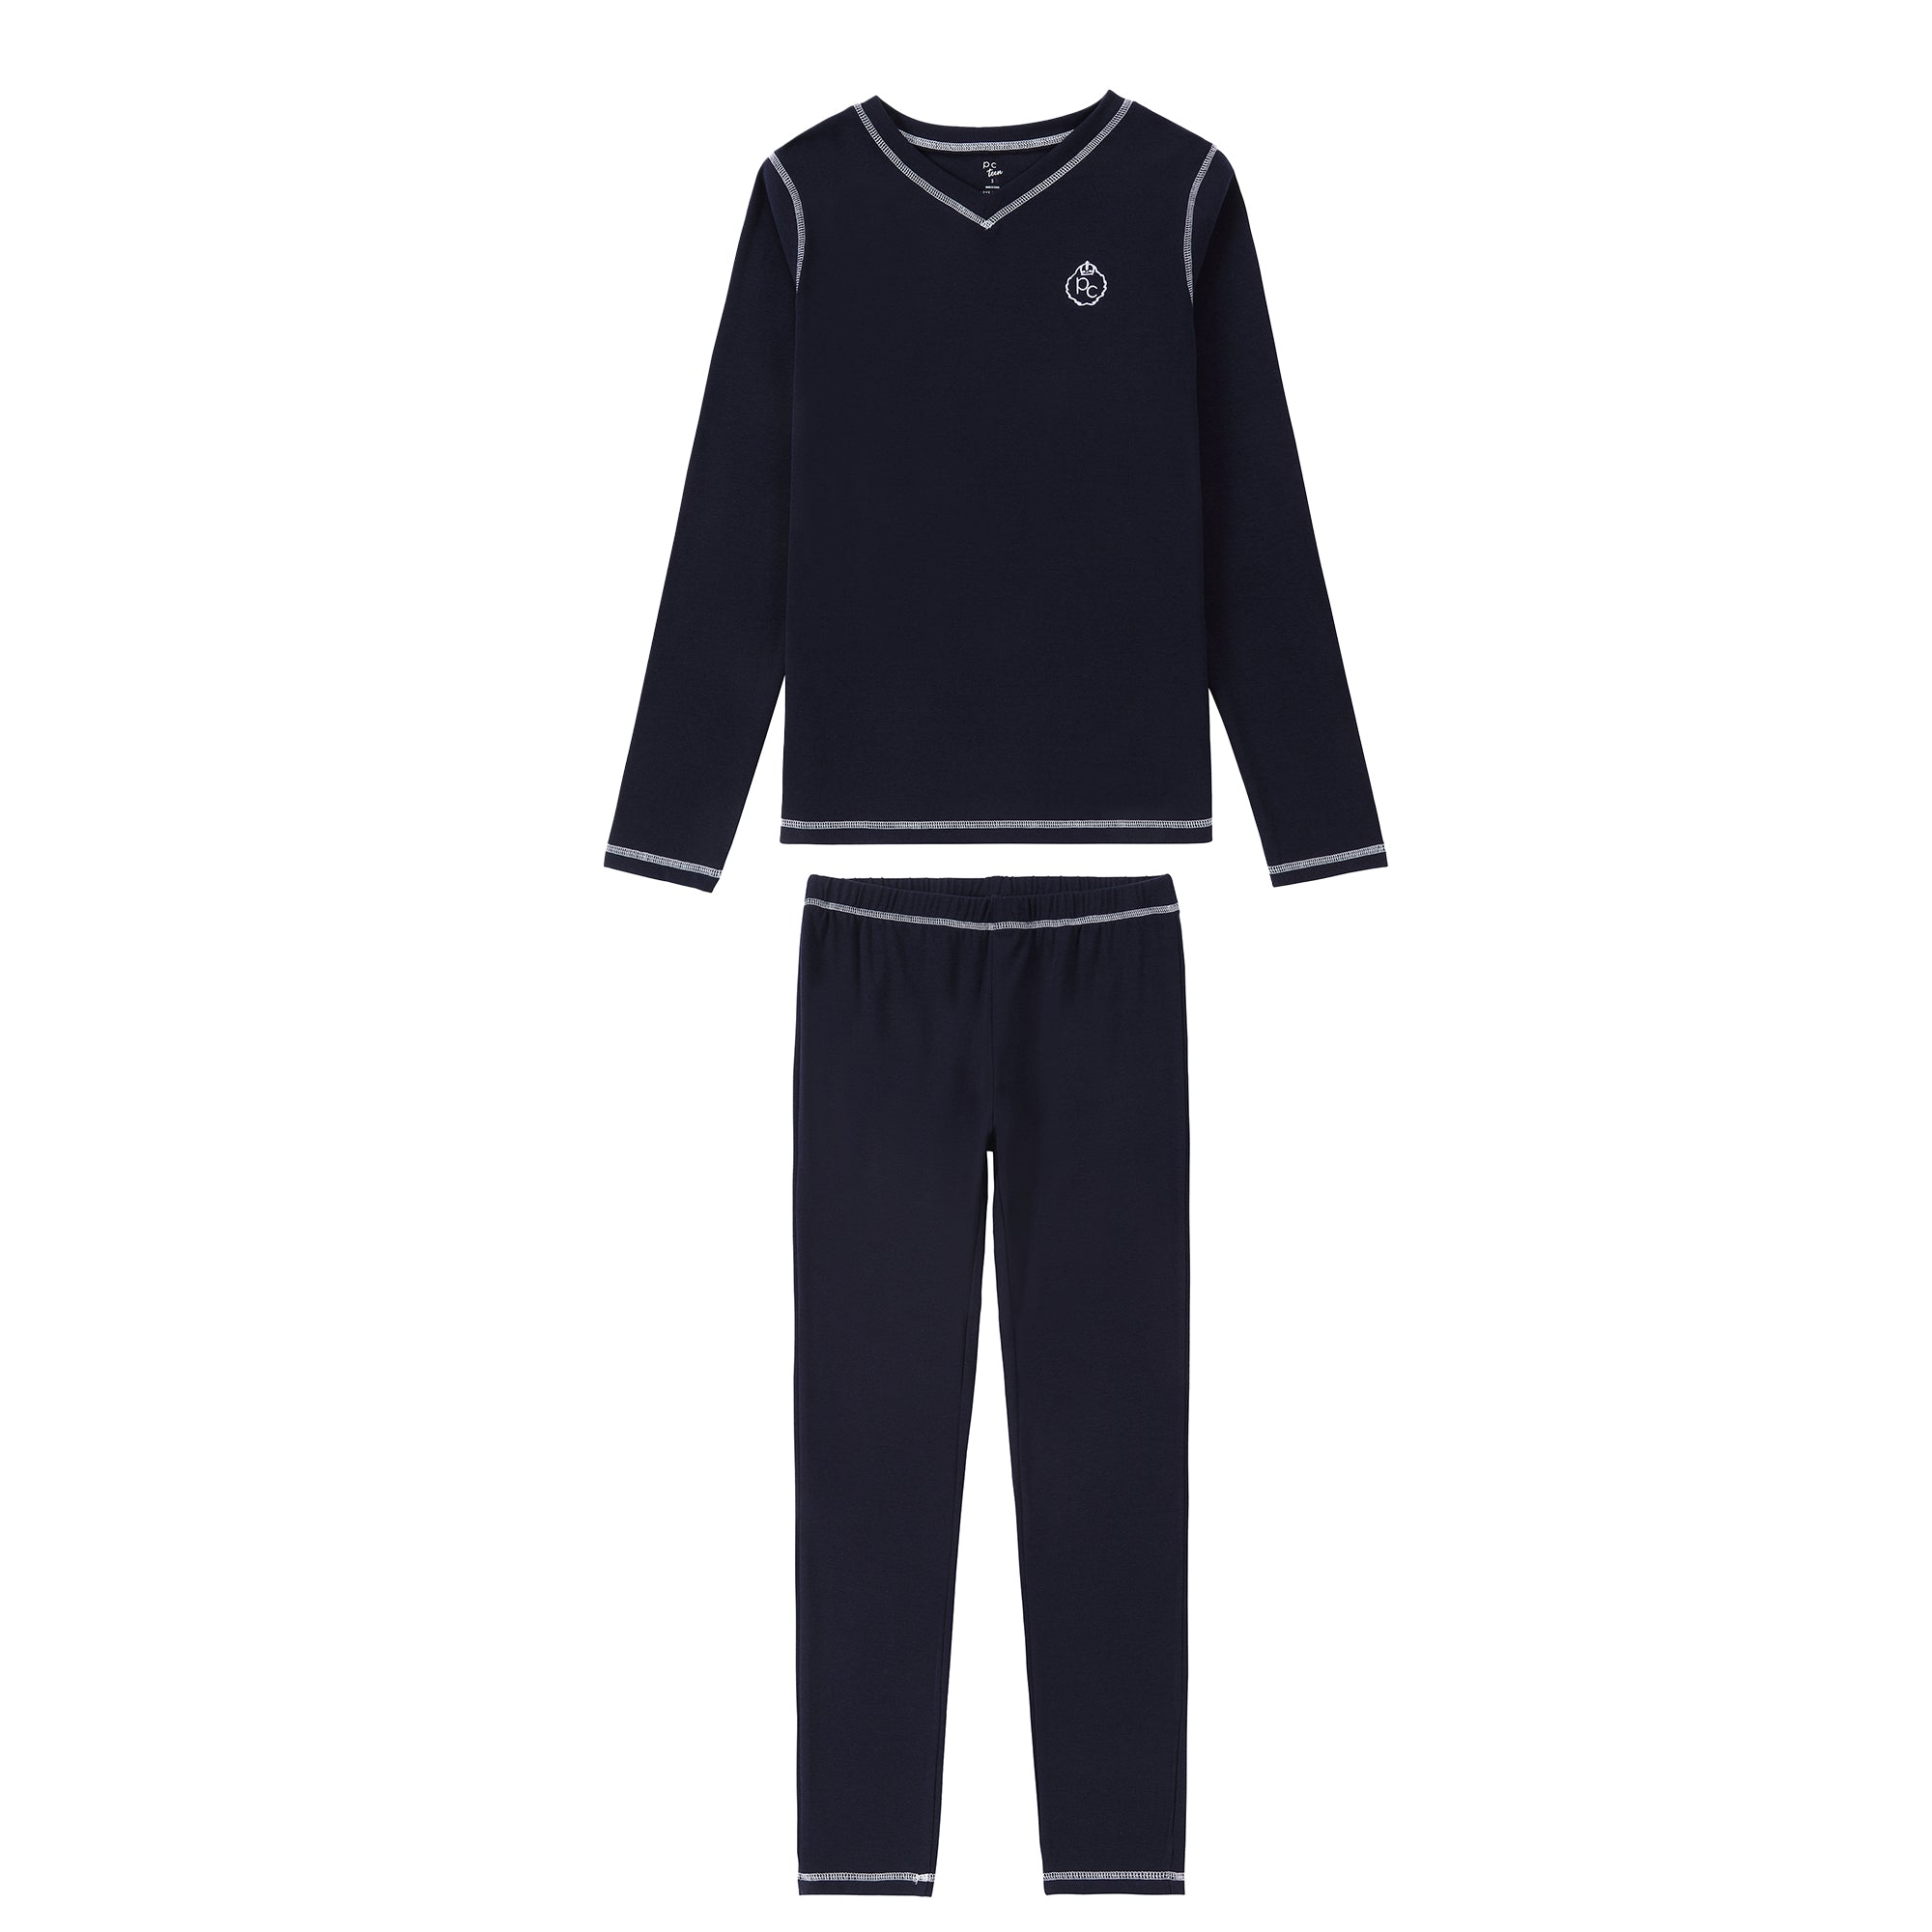 Navy V-Neck Pajama With White Accents